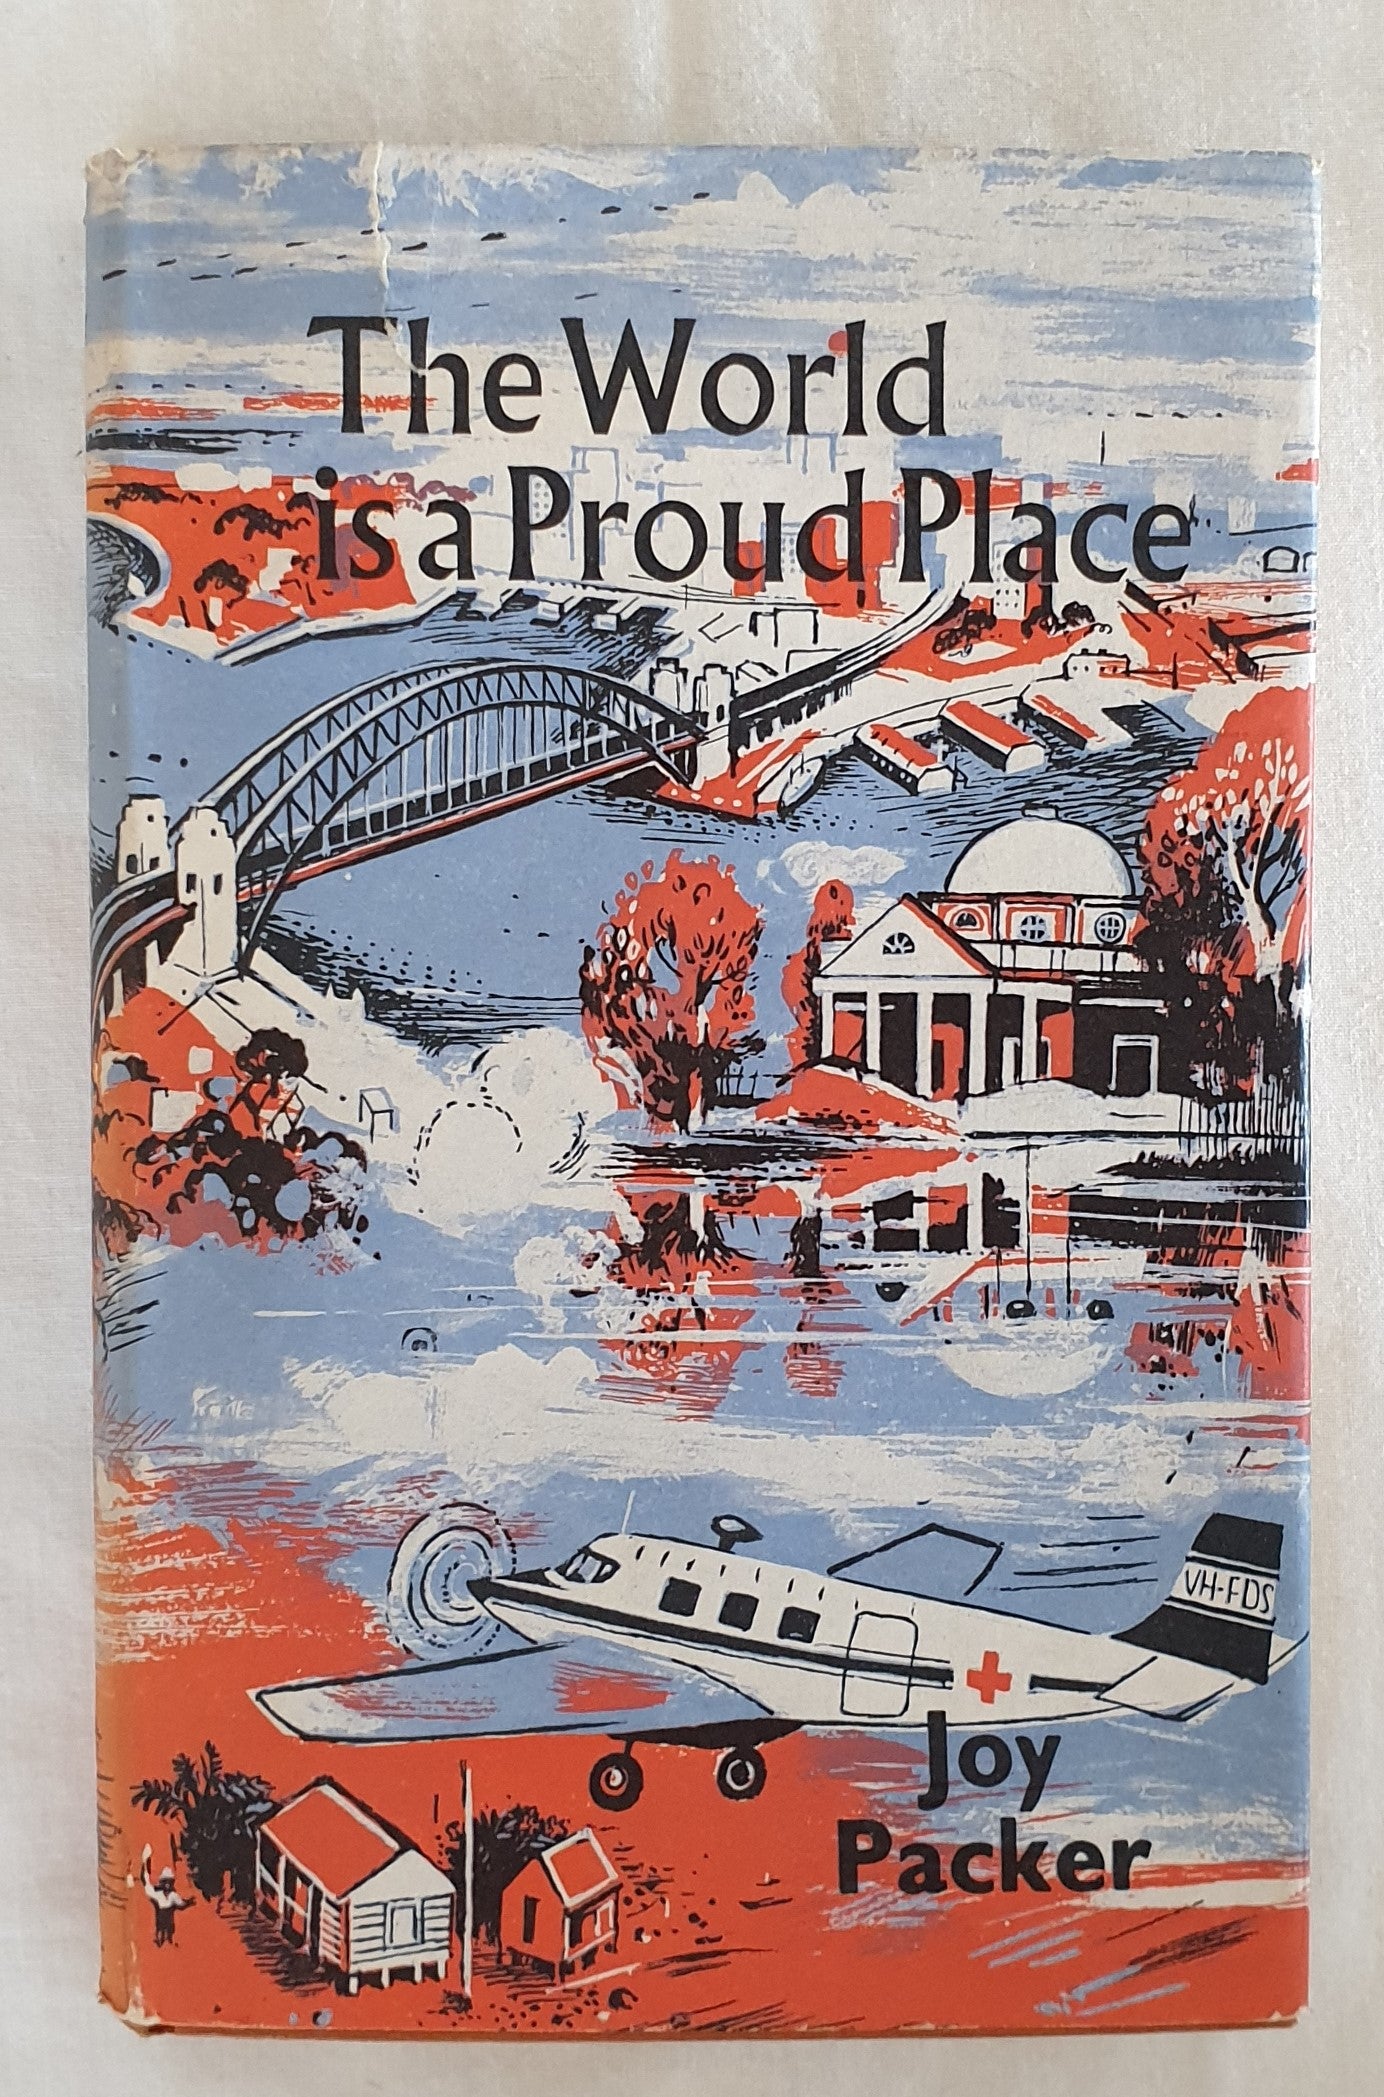 The World is a Proud Place by Joy Parker